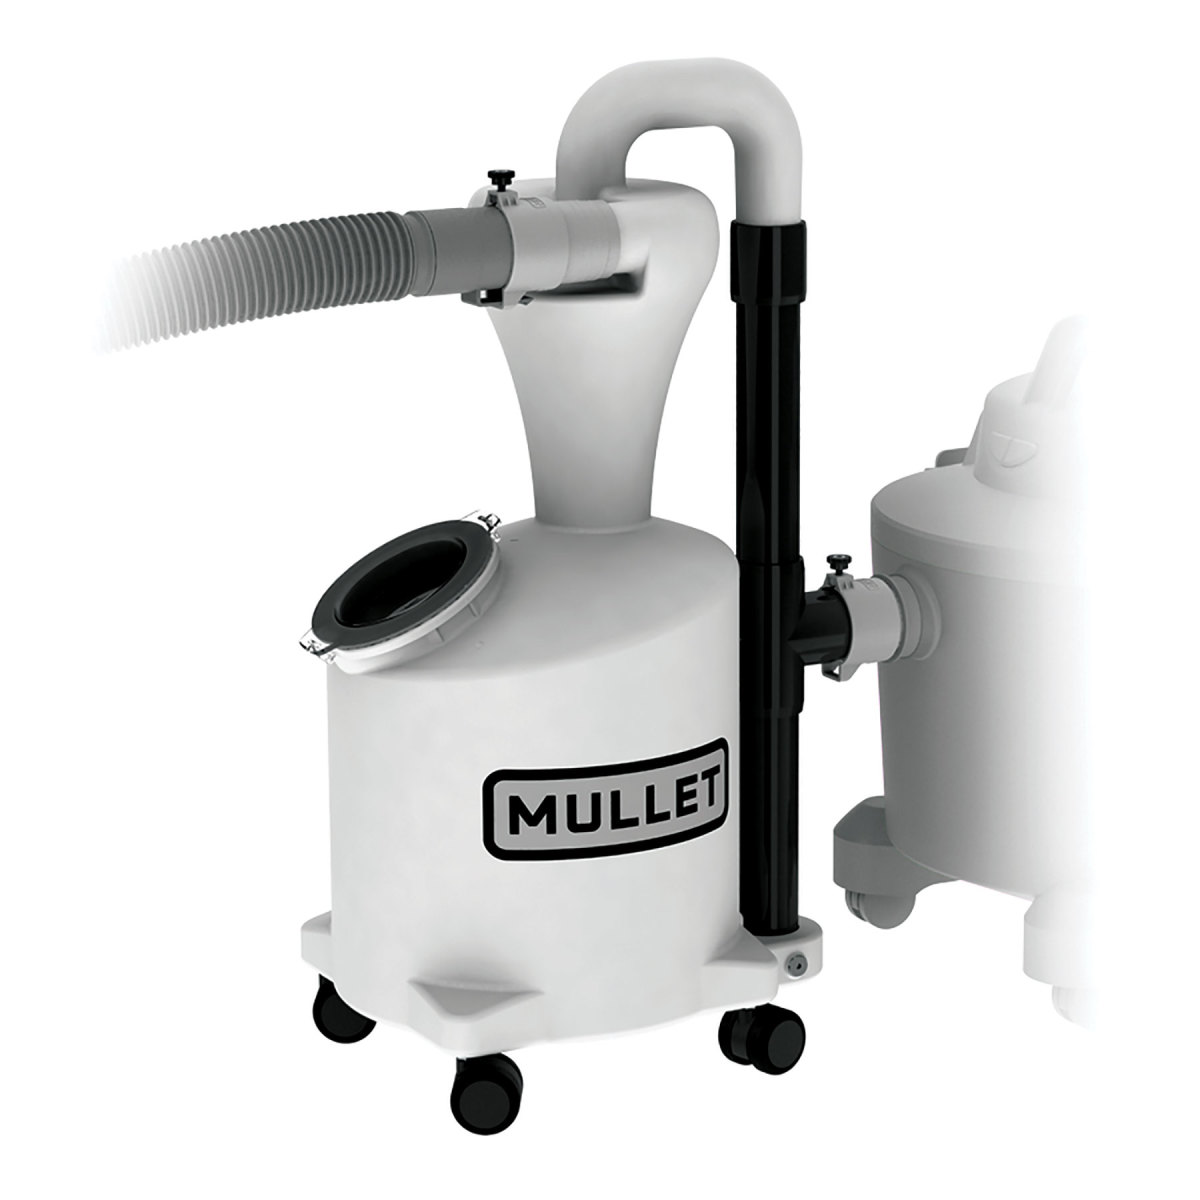 The High-Speed Cyclone Dust Collector from Mullet Tools features seamless, one-piece construction to provide 
unimpeded air flow, according to the company.